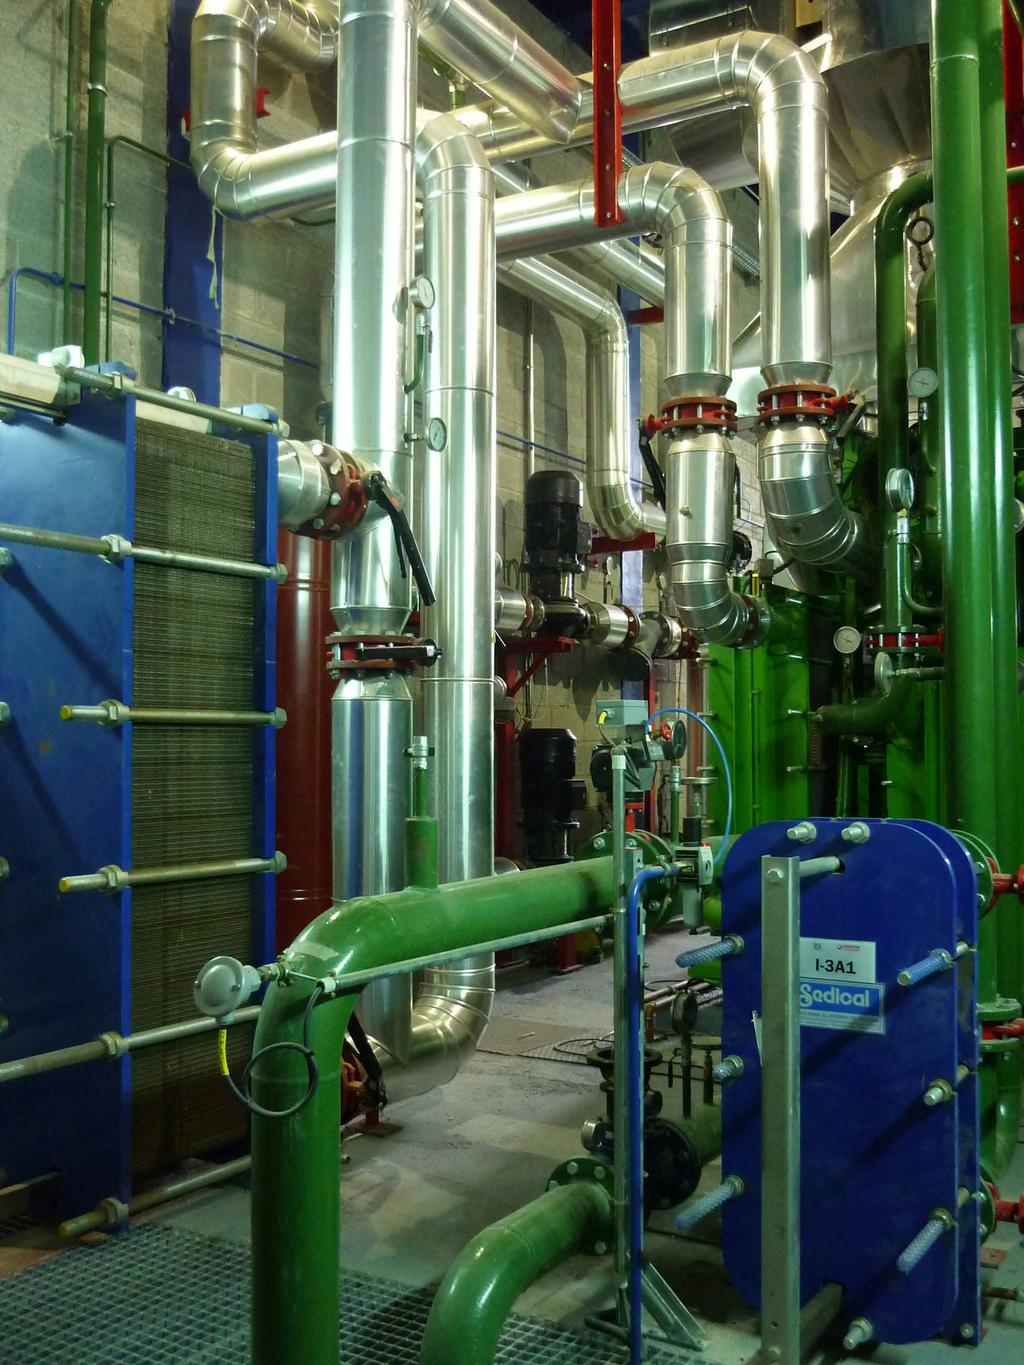 The hot water produced is injected directly into the district heating